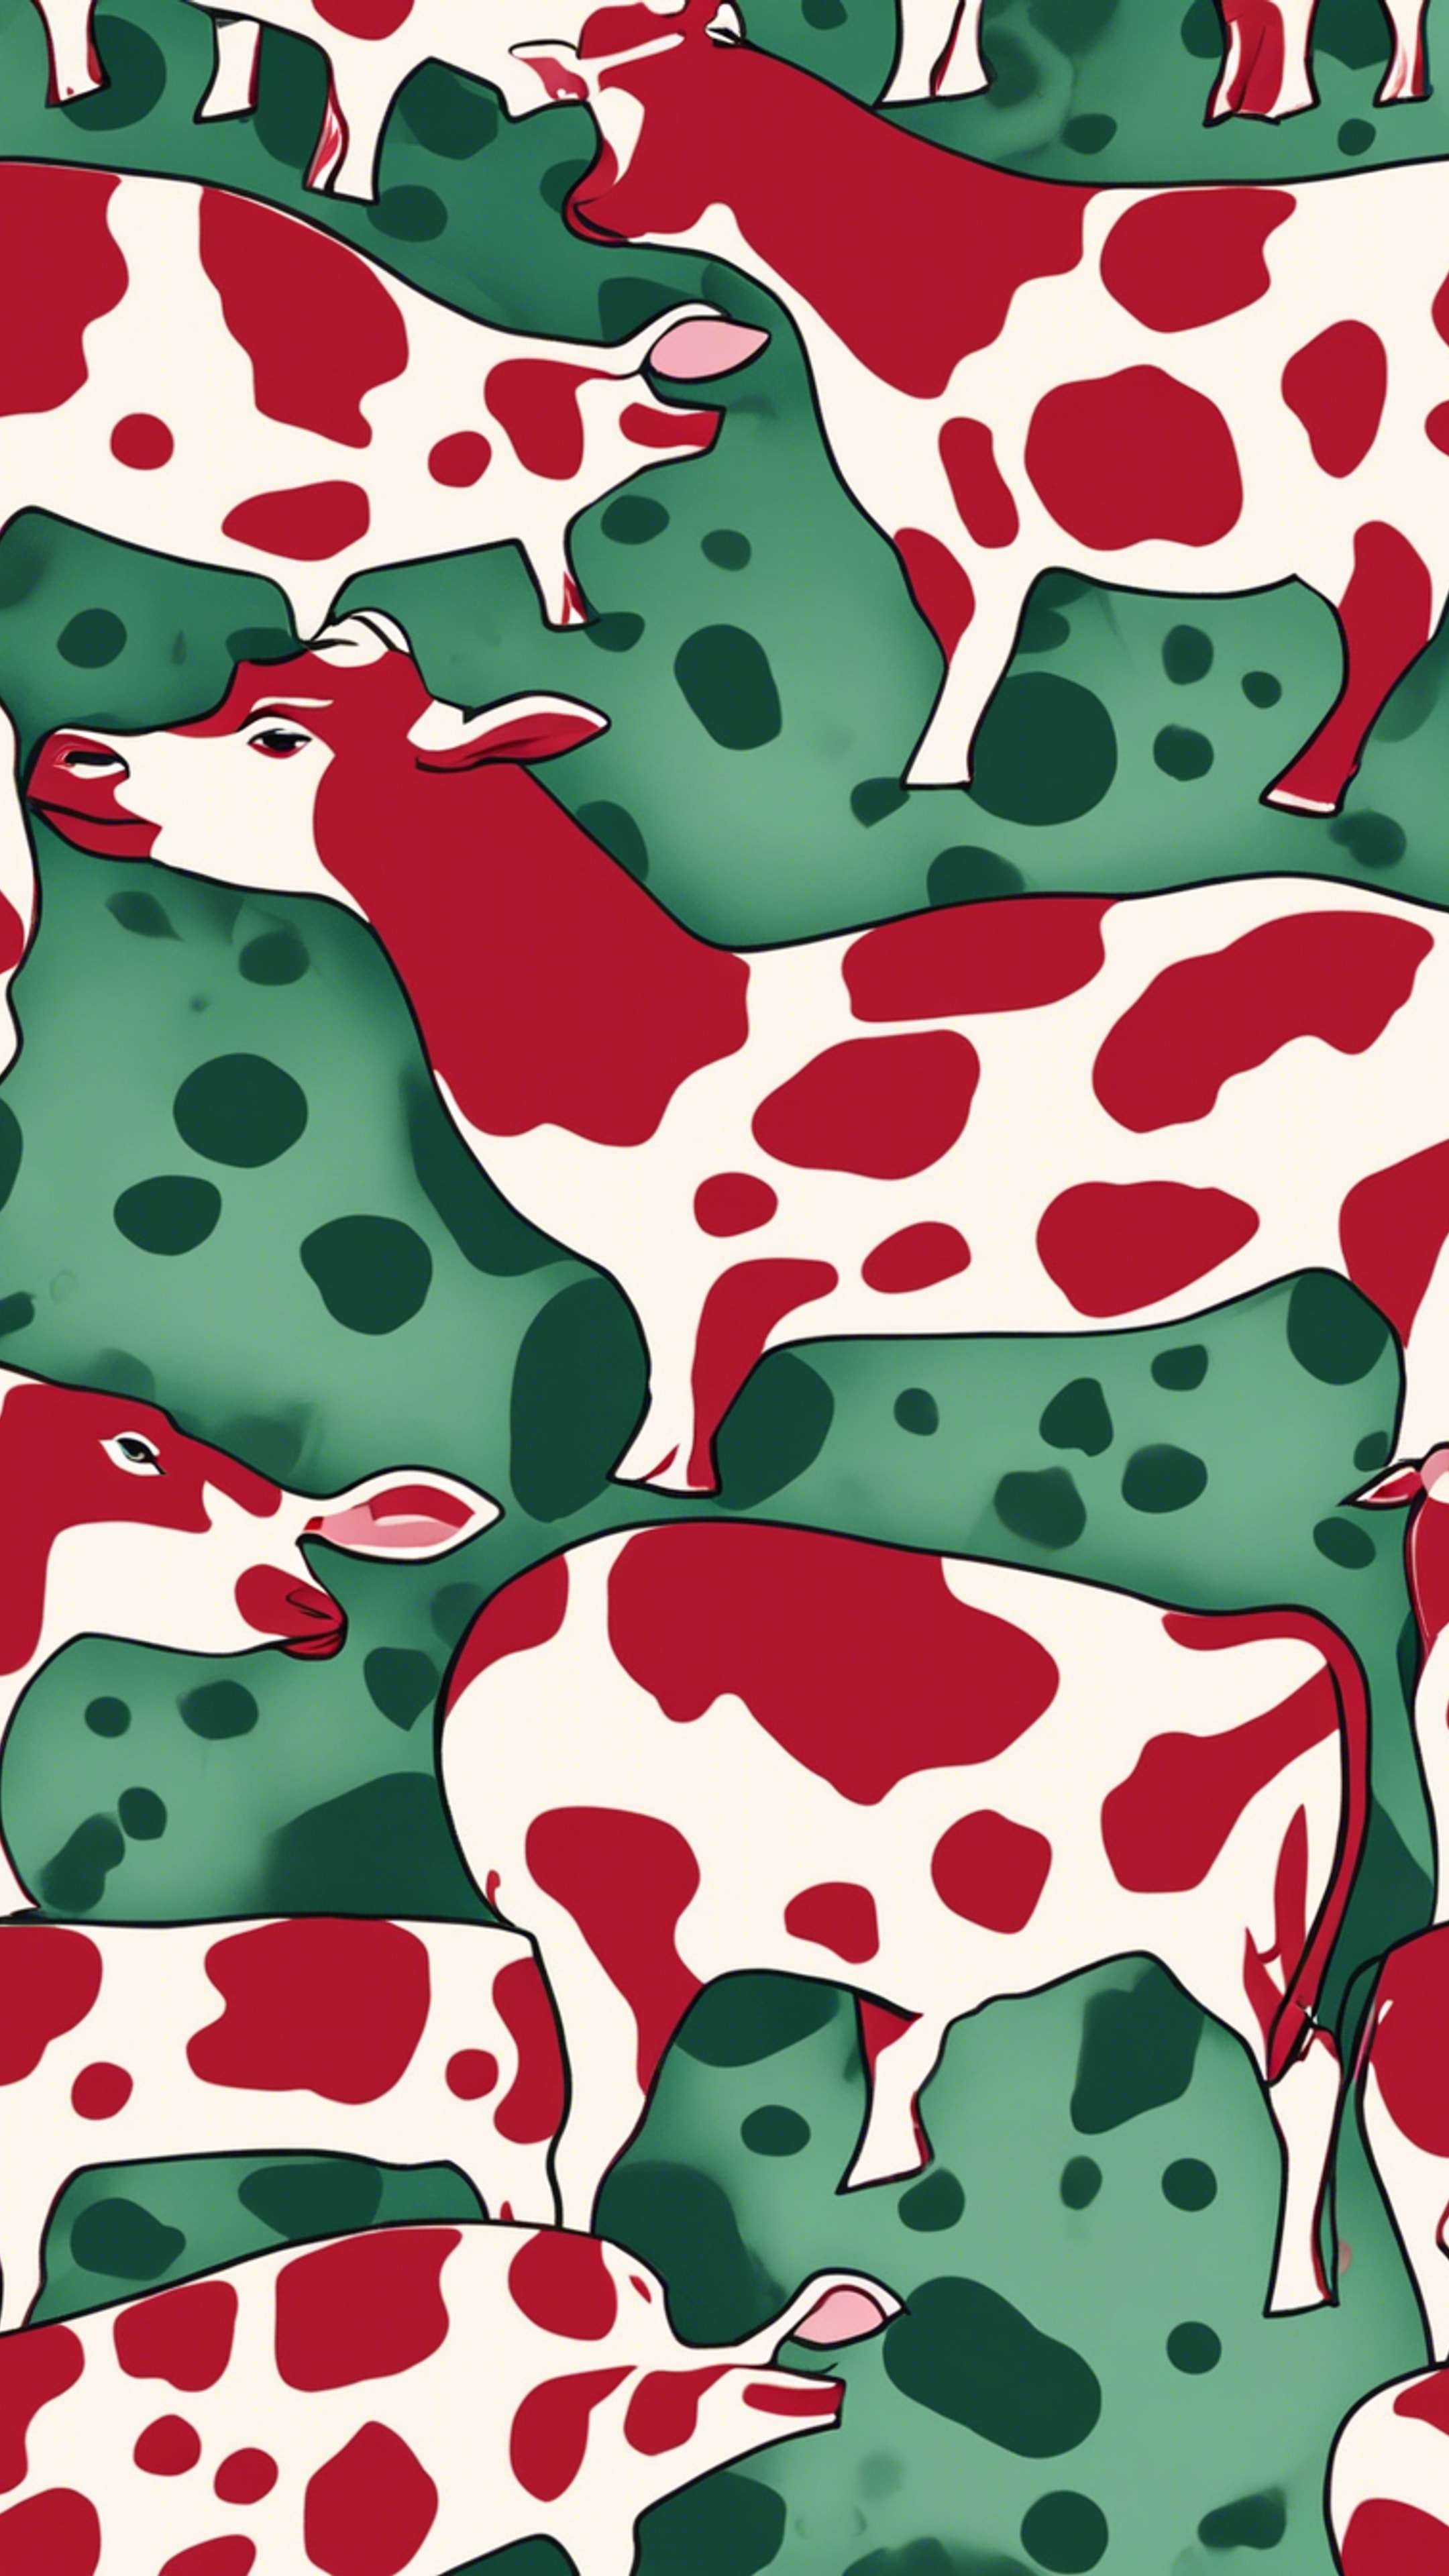 A dynamic, textured pattern of red and green cow spots. 벽지[159333102a774de6a0e2]